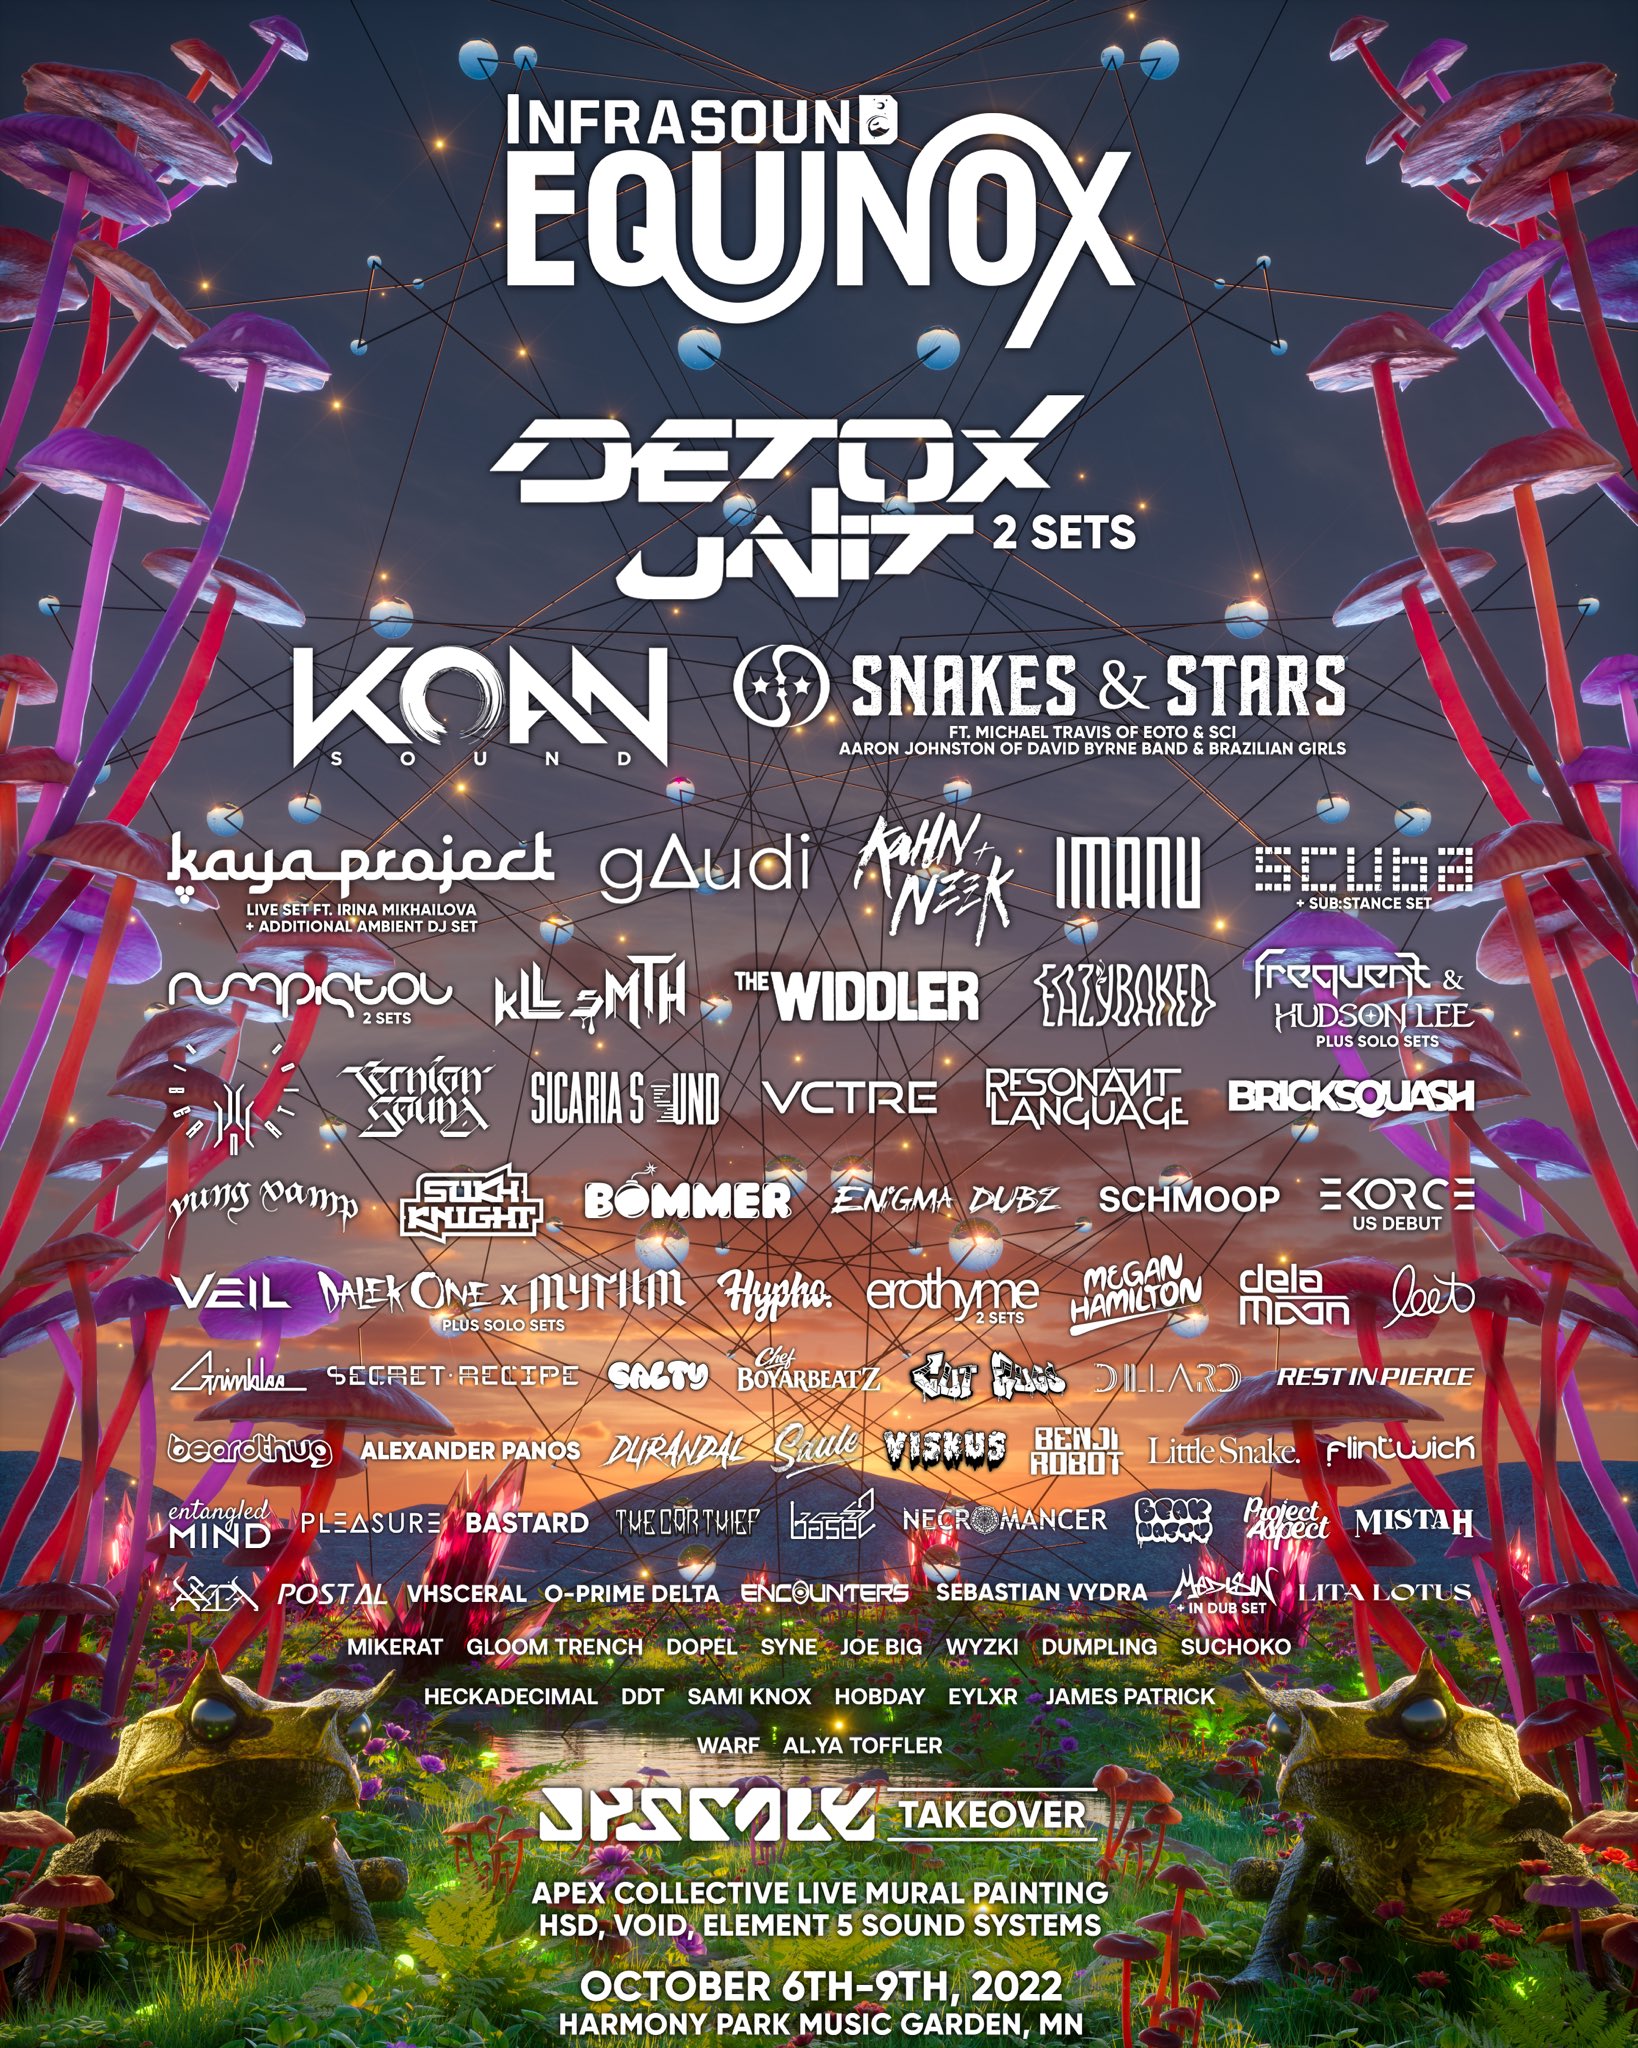 Infrasound Equinox Drops Insane Lineup for 2022 Edition EDM Identity